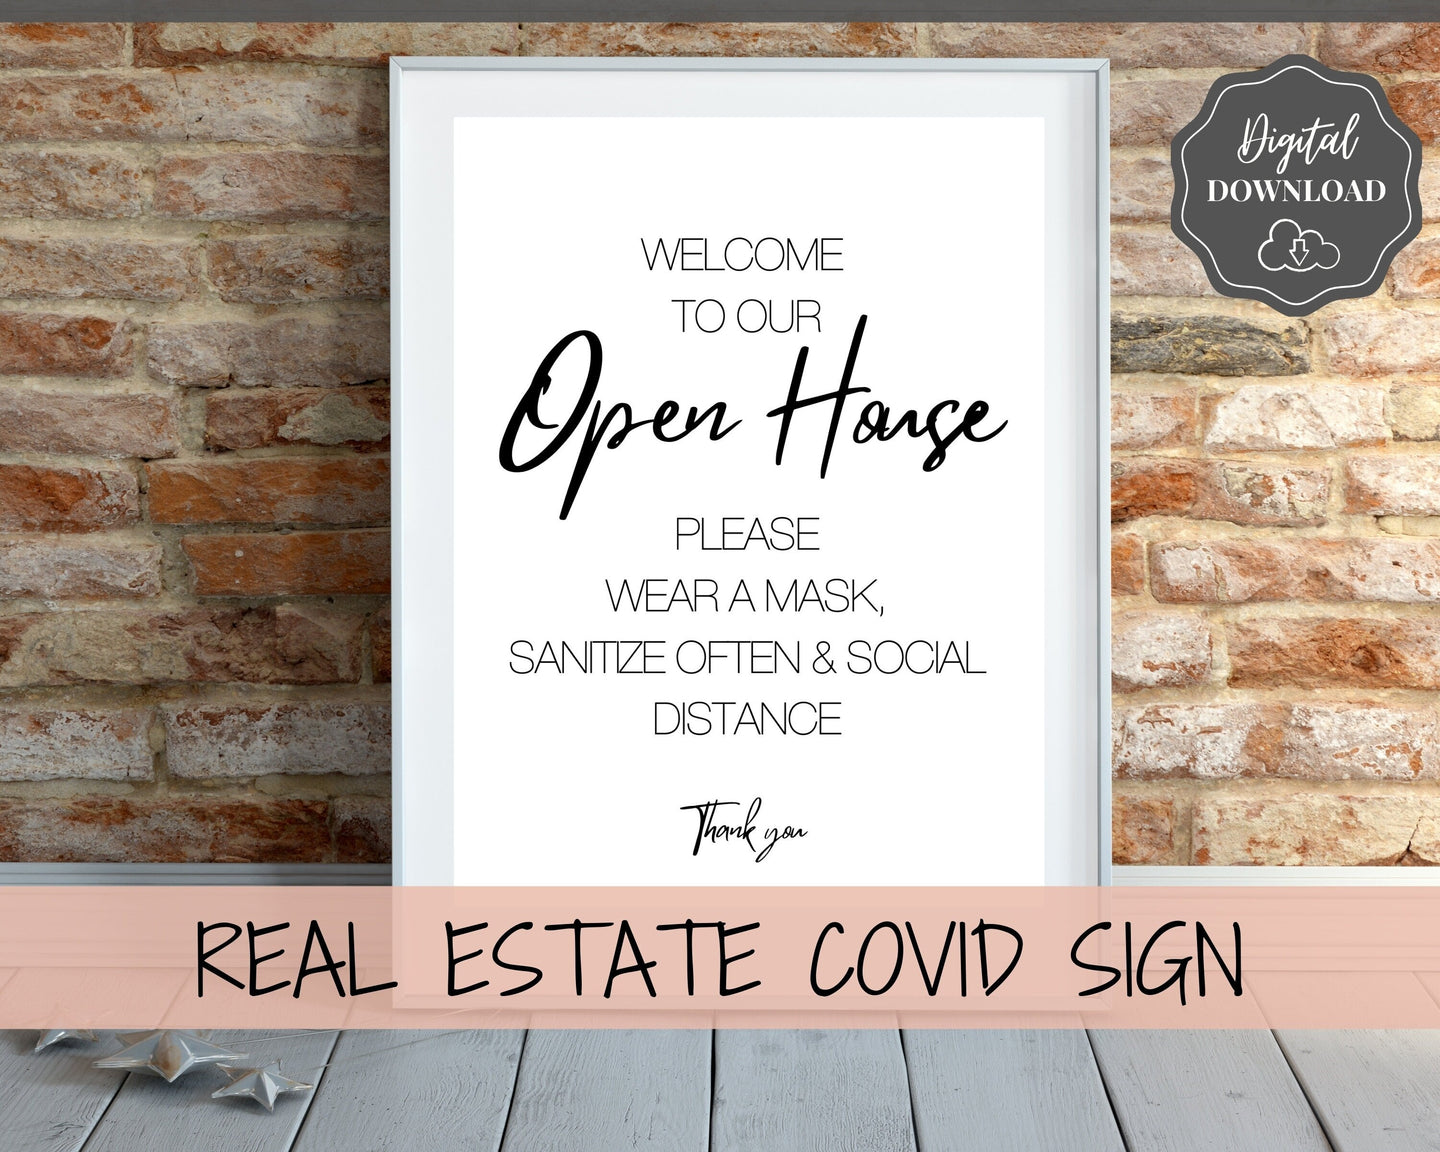 Real Estate Open House COVID SIGN. Welcome Sign, Wear a mask, Social Distancing, Corona Virus Signs, Realtor Sign, Face Mask Sign, Signage